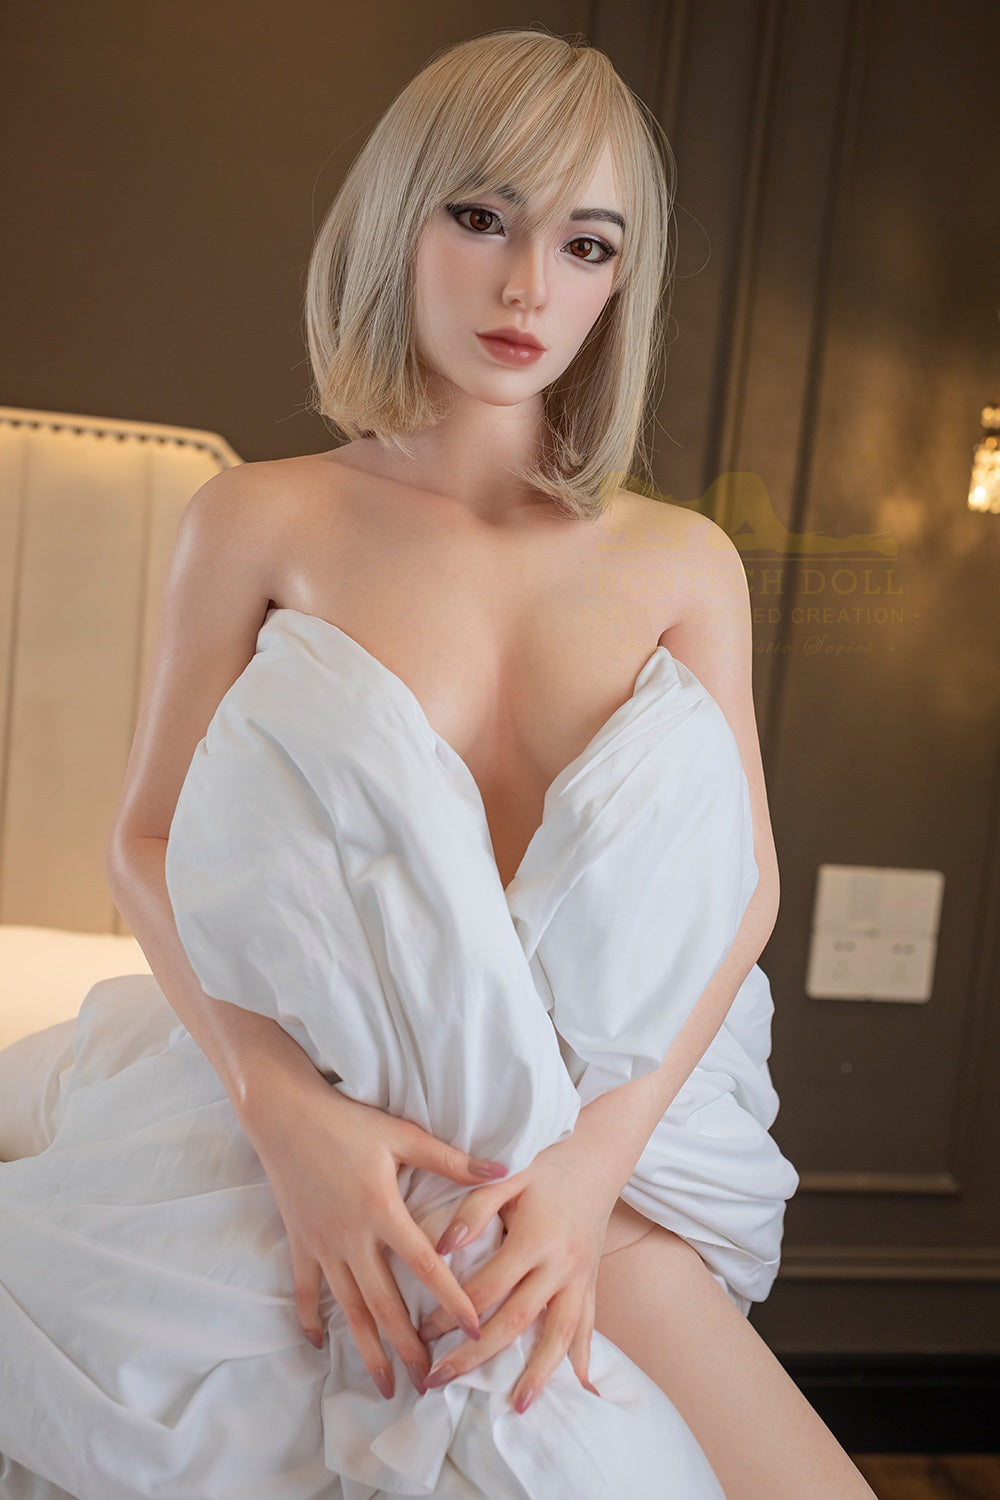 Irontechdoll Ophelia 5ft48 / 167cm S47 Head Full Silicone Blonde Teen Sex Doll